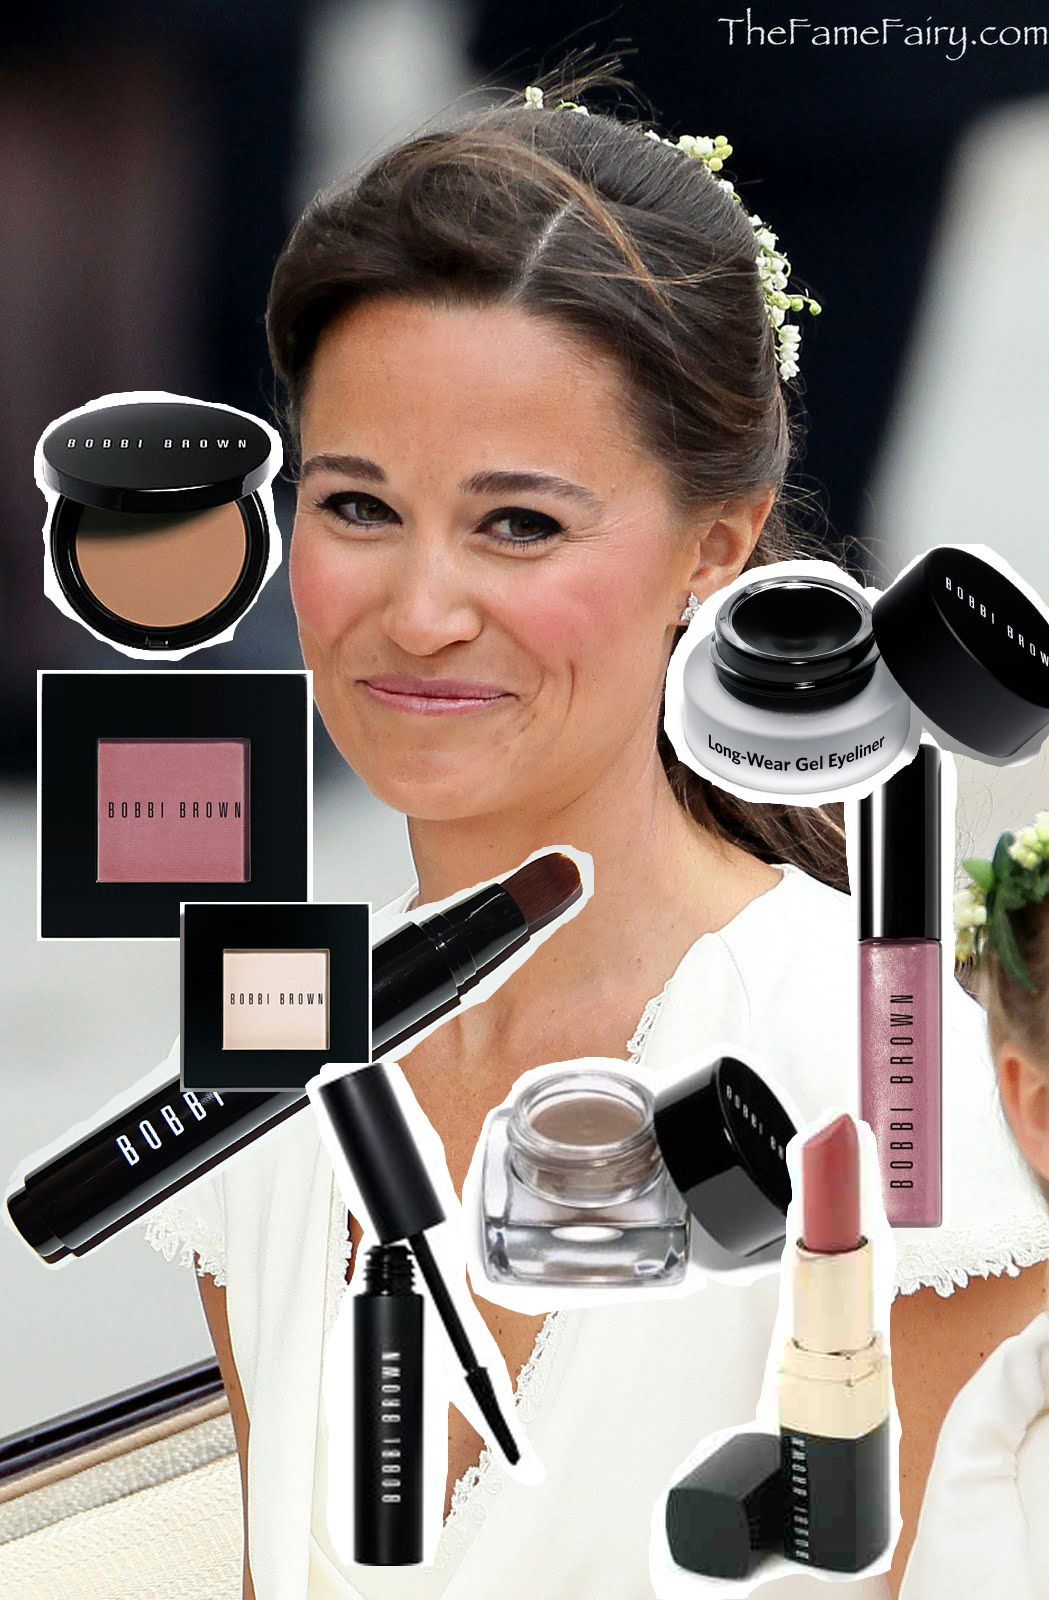 Bobbi Brown Wedding Makeup
 bobbi brown wedding makeup I actually liked Pippa s look